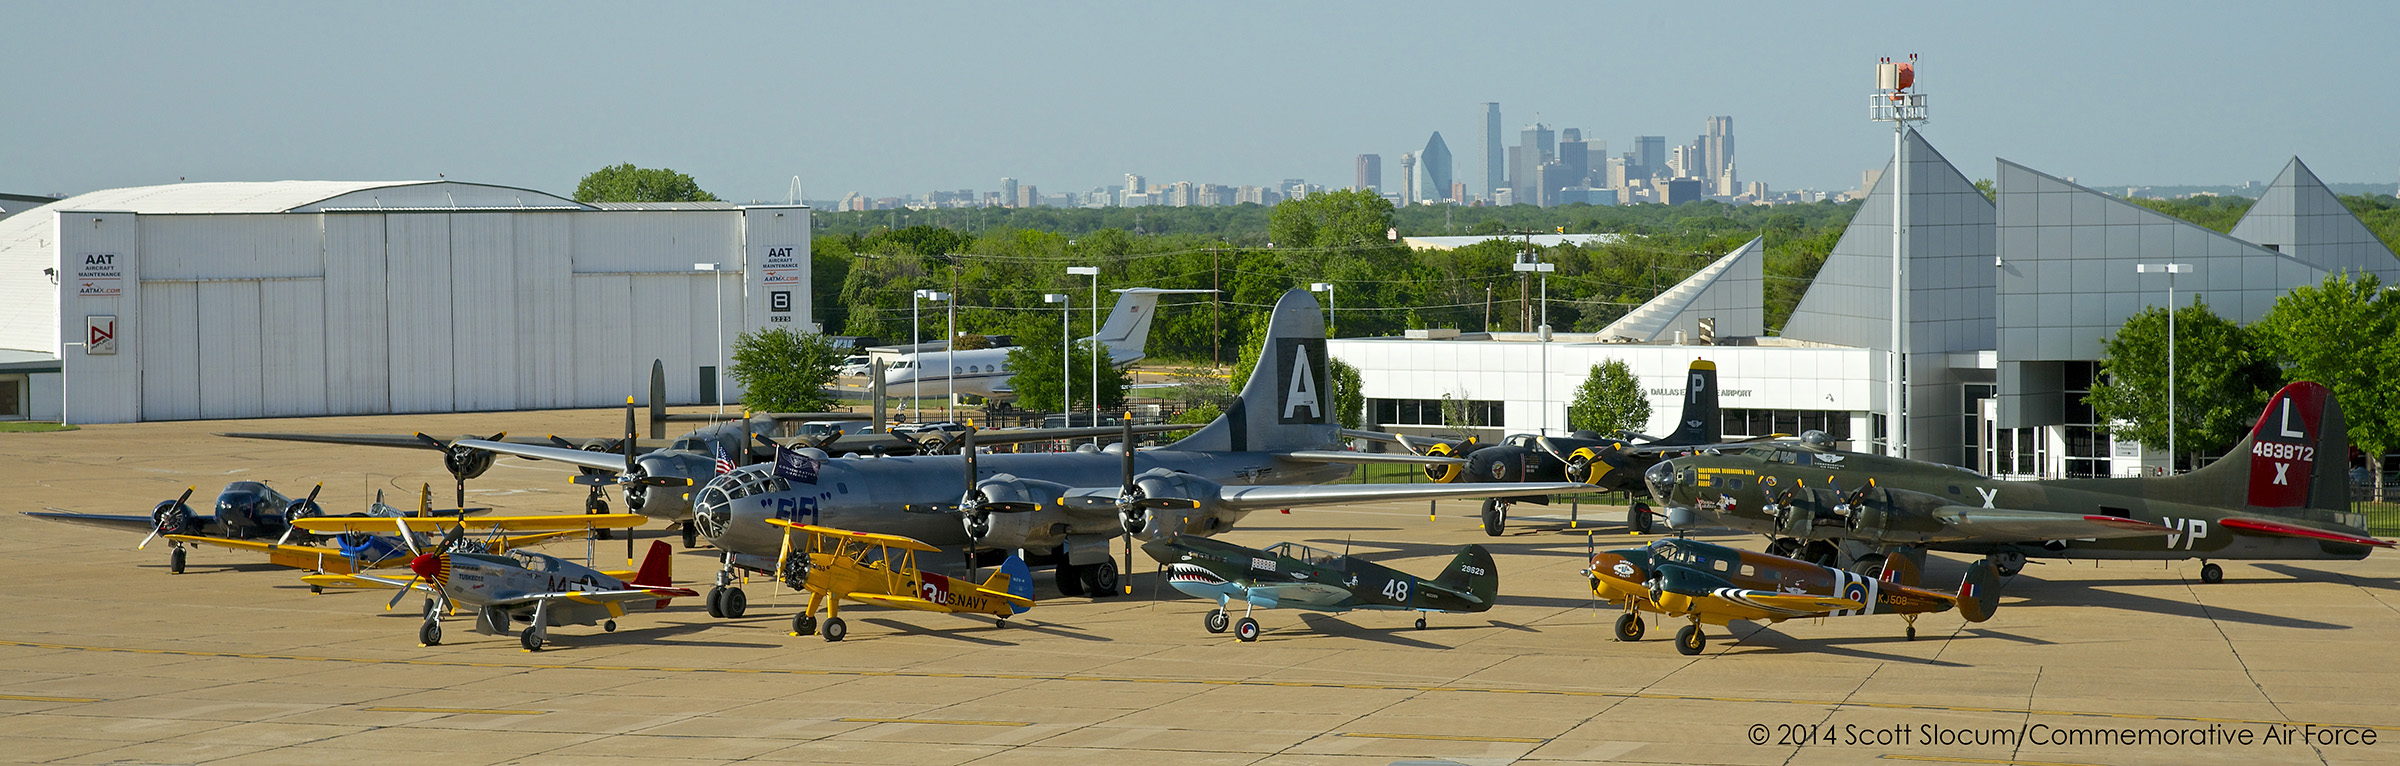 Several of the CAF aircraft at the National Air Base unveiling ceremony on Dallas Executive Airport (photo by Scott Slocum via CAF)